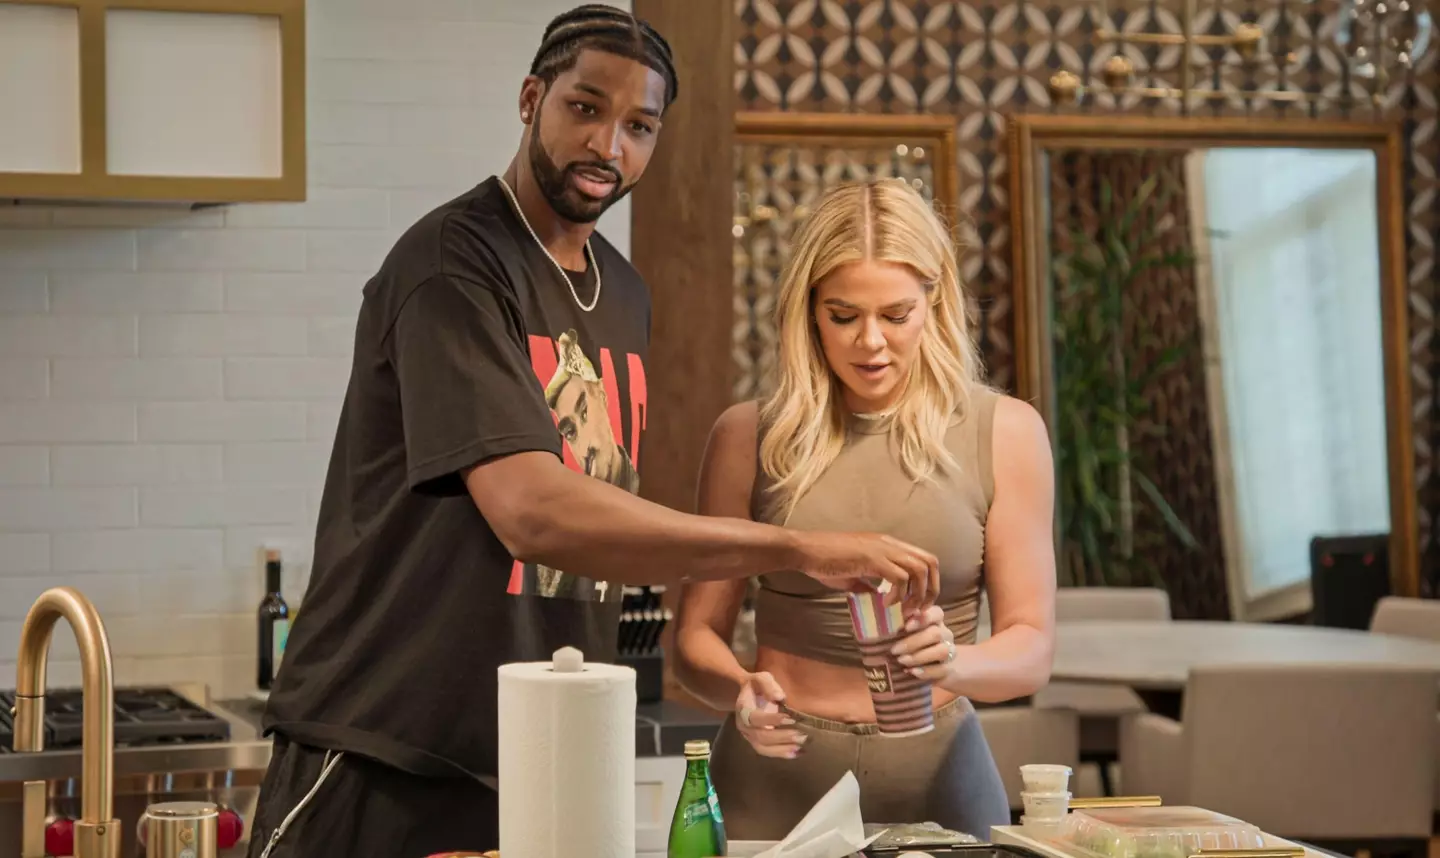 Khloe and Tristan have welcomed their second child.